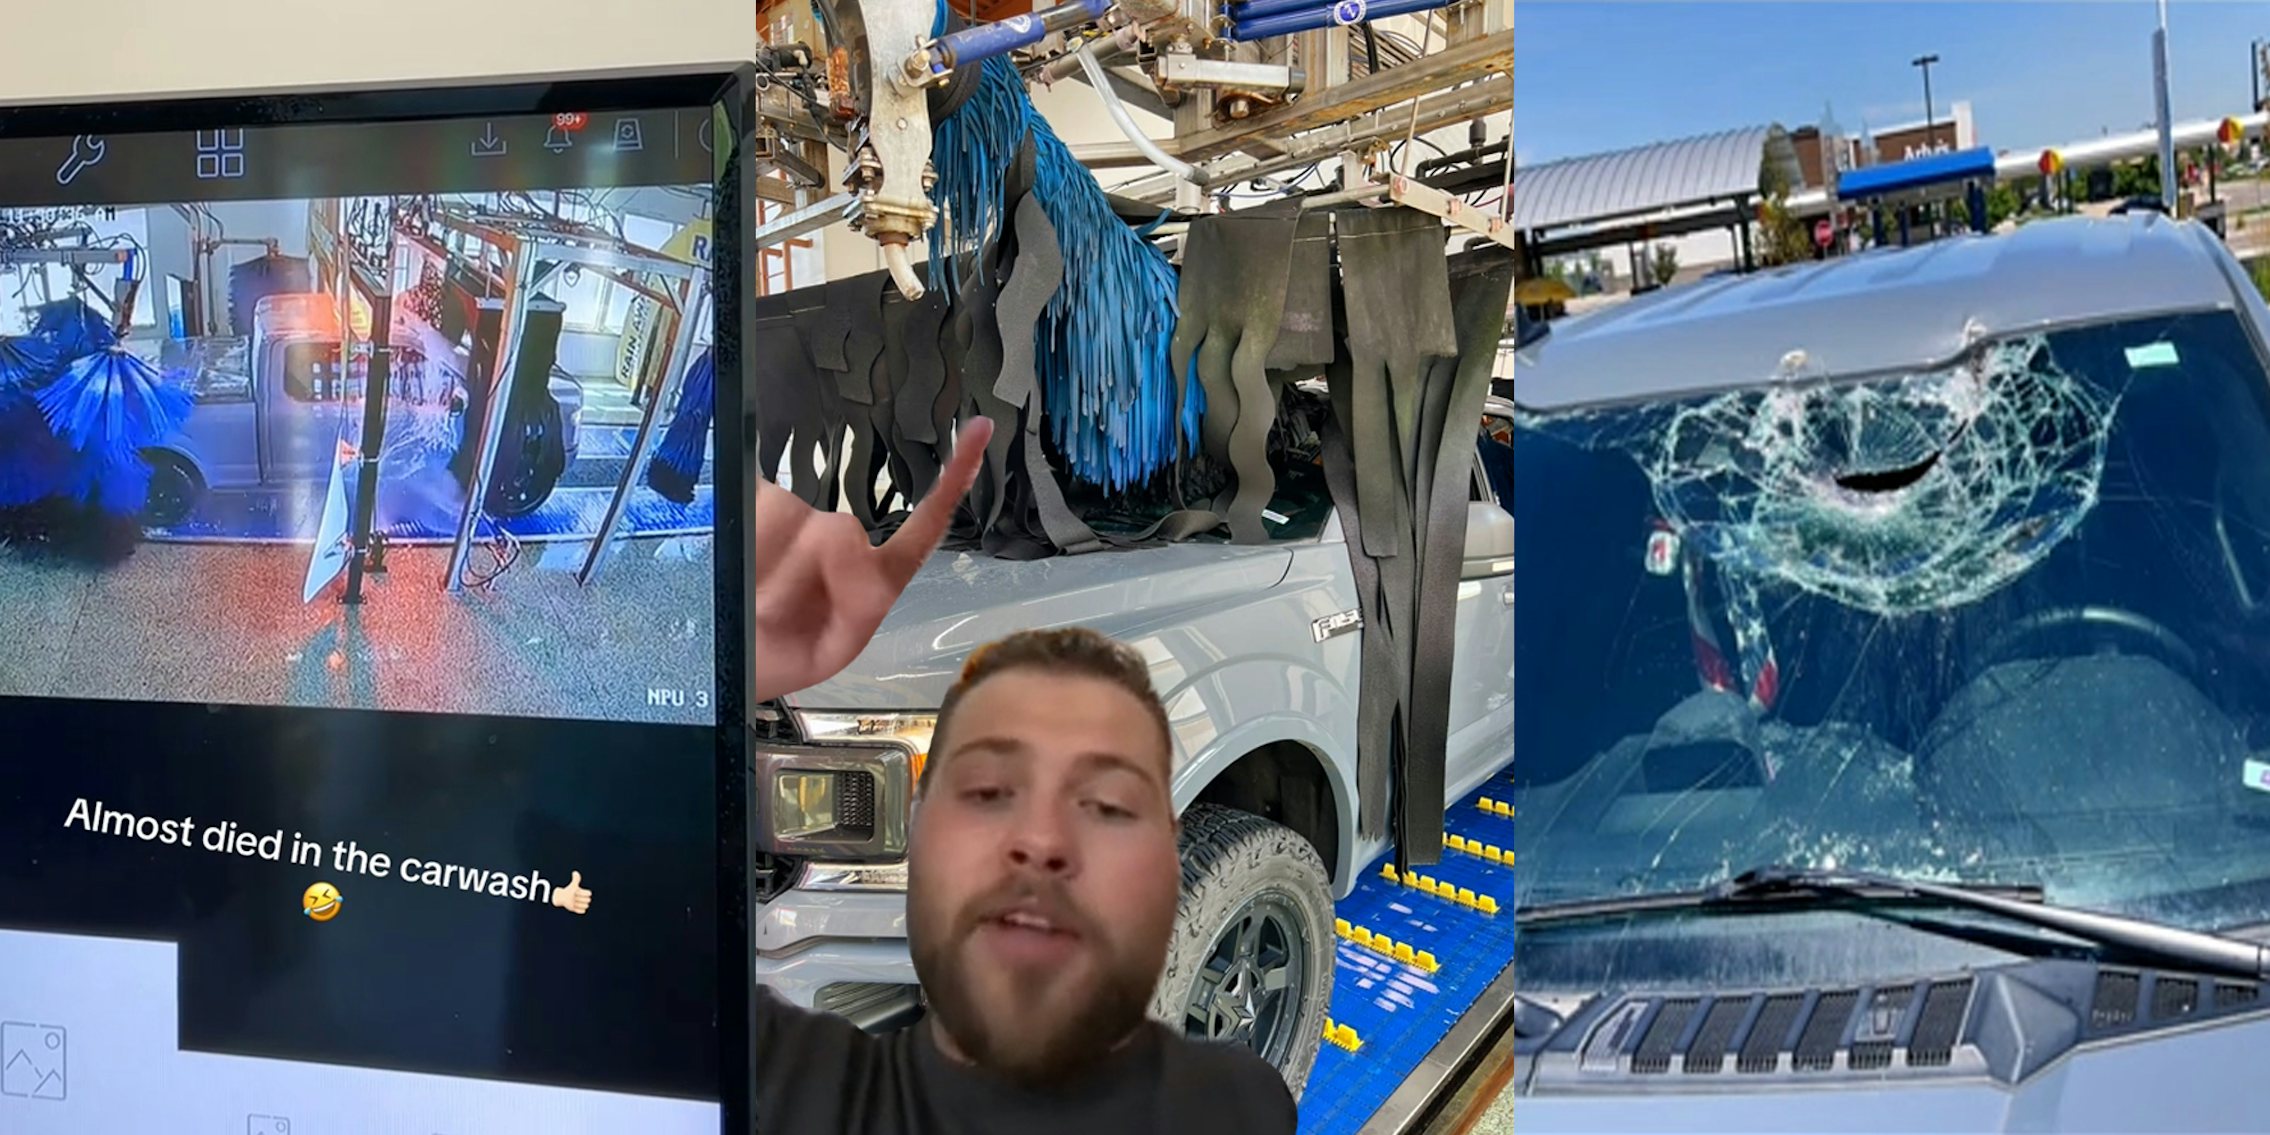 security footage of carwash showing truck with caption 'Almost died in the carwash' (l) man greenscreen TikTok over image of truck with carwash equipment damaging vehicle (c) smashed windshield of truck (r)